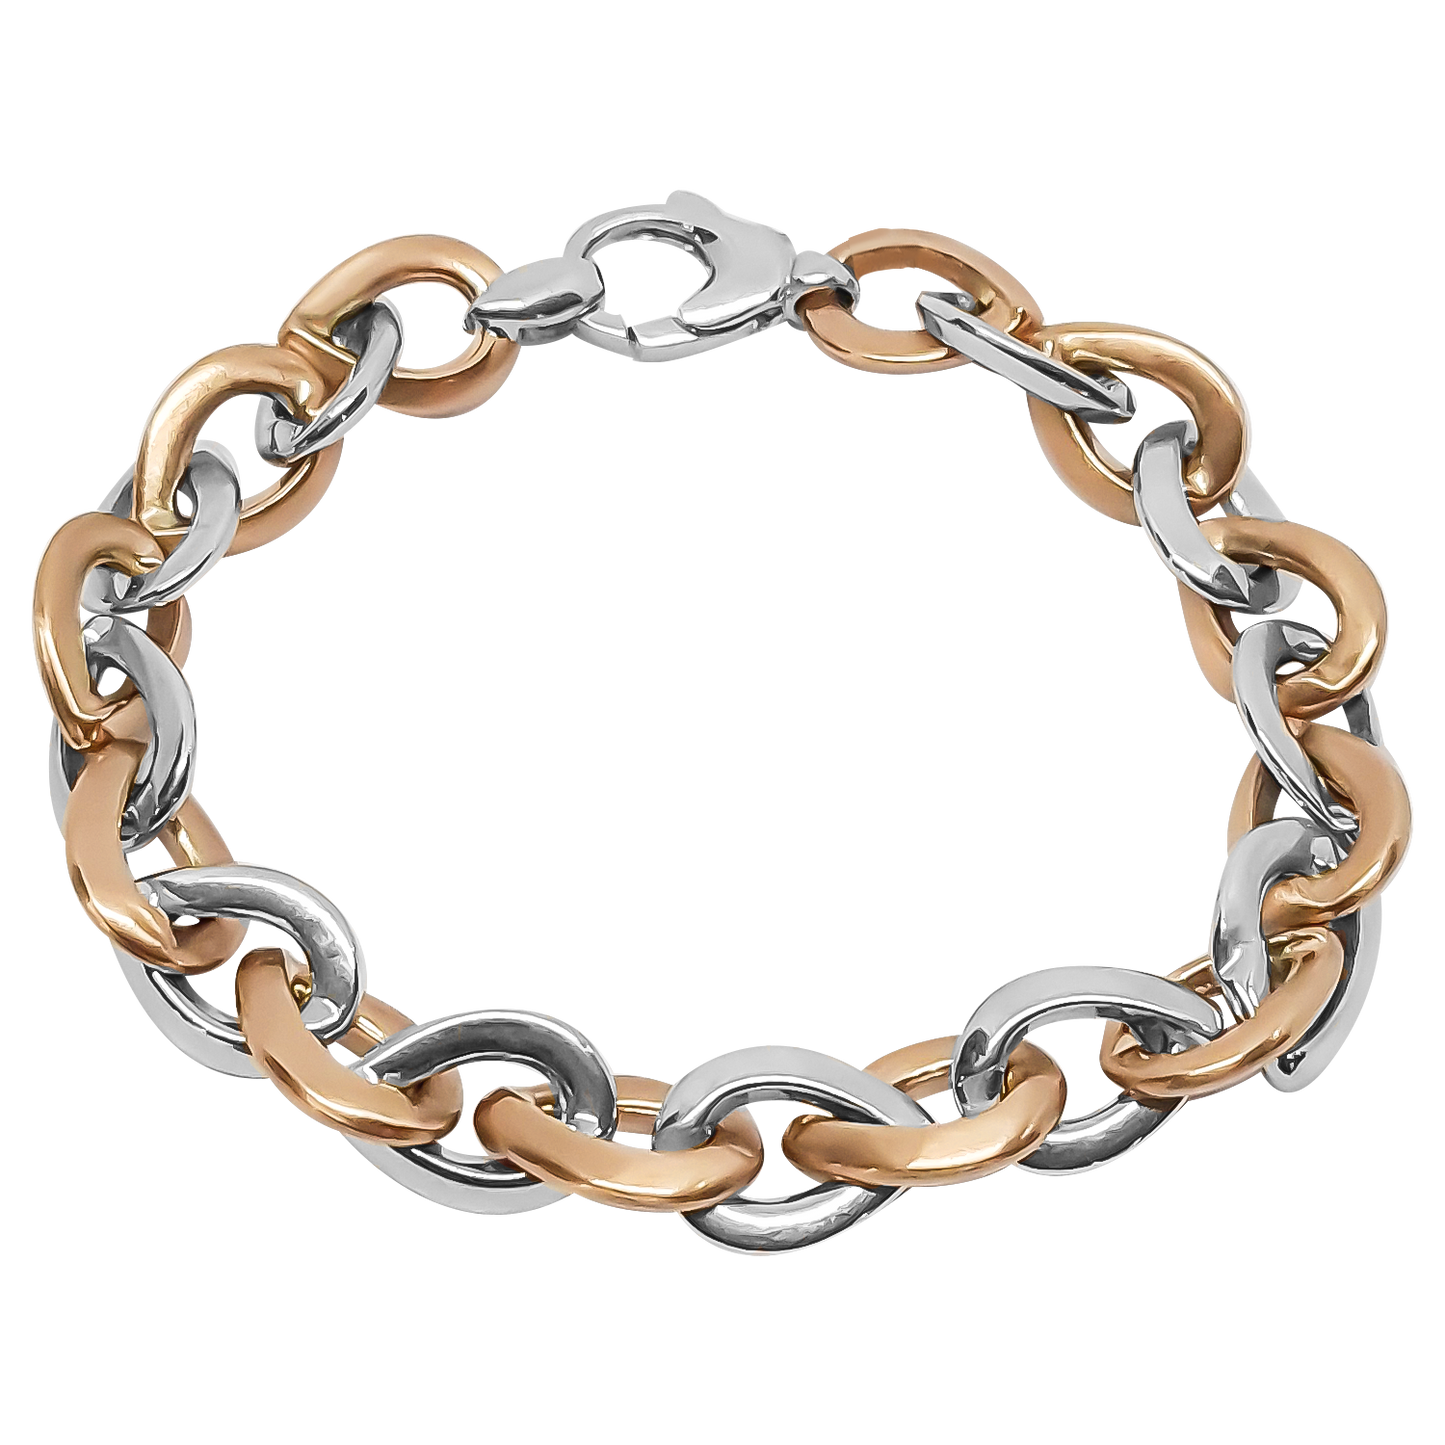 20cm Marquise Link Bracelet in 9ct Yellow Gold and Rose Gold.